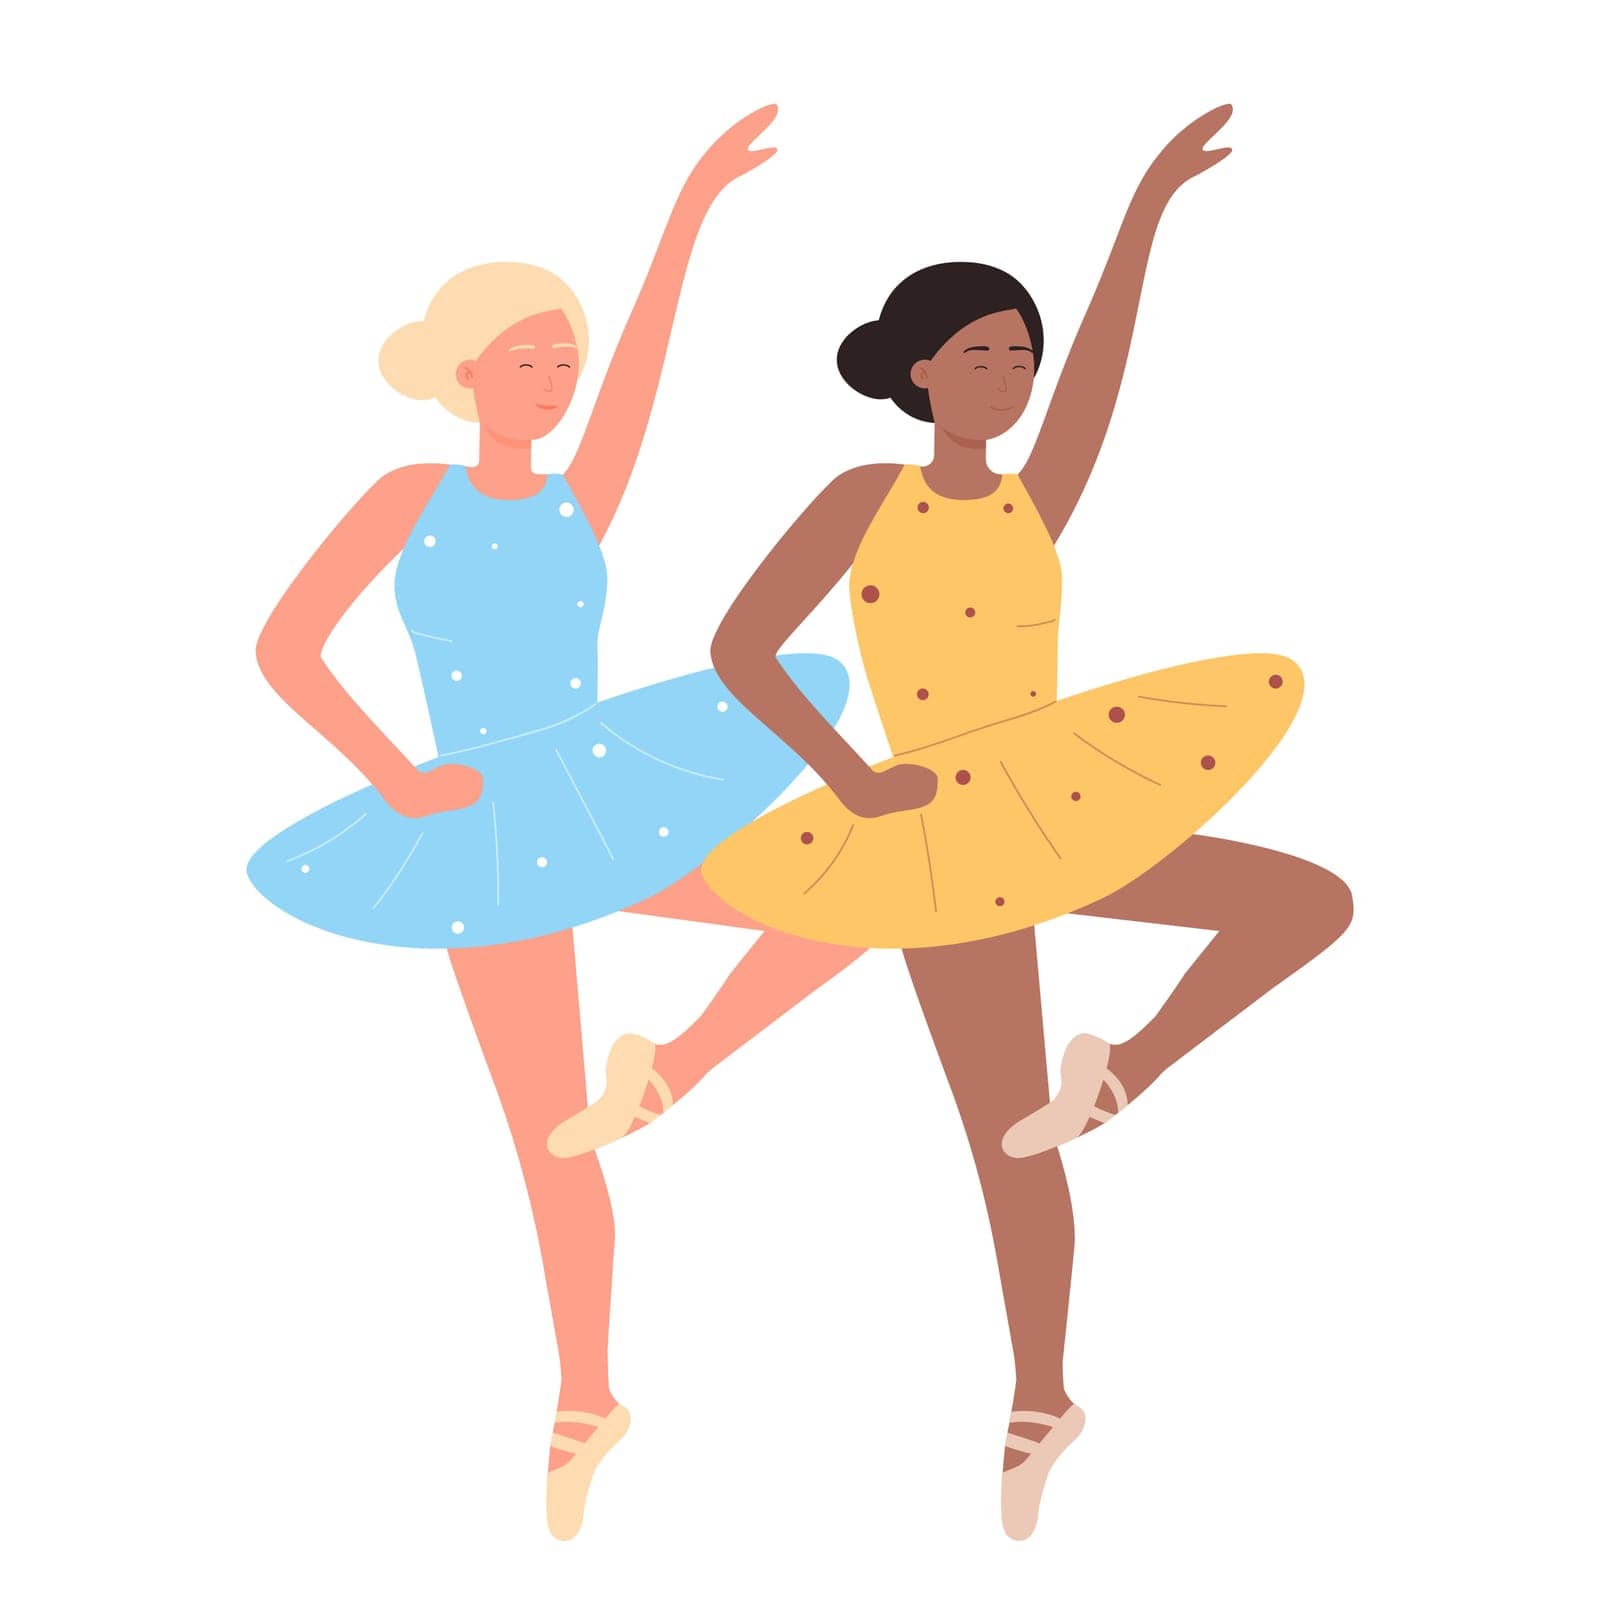 Ballet female students of artistic classical dance. Ballerina doing graceful performing movements flat vector illustration